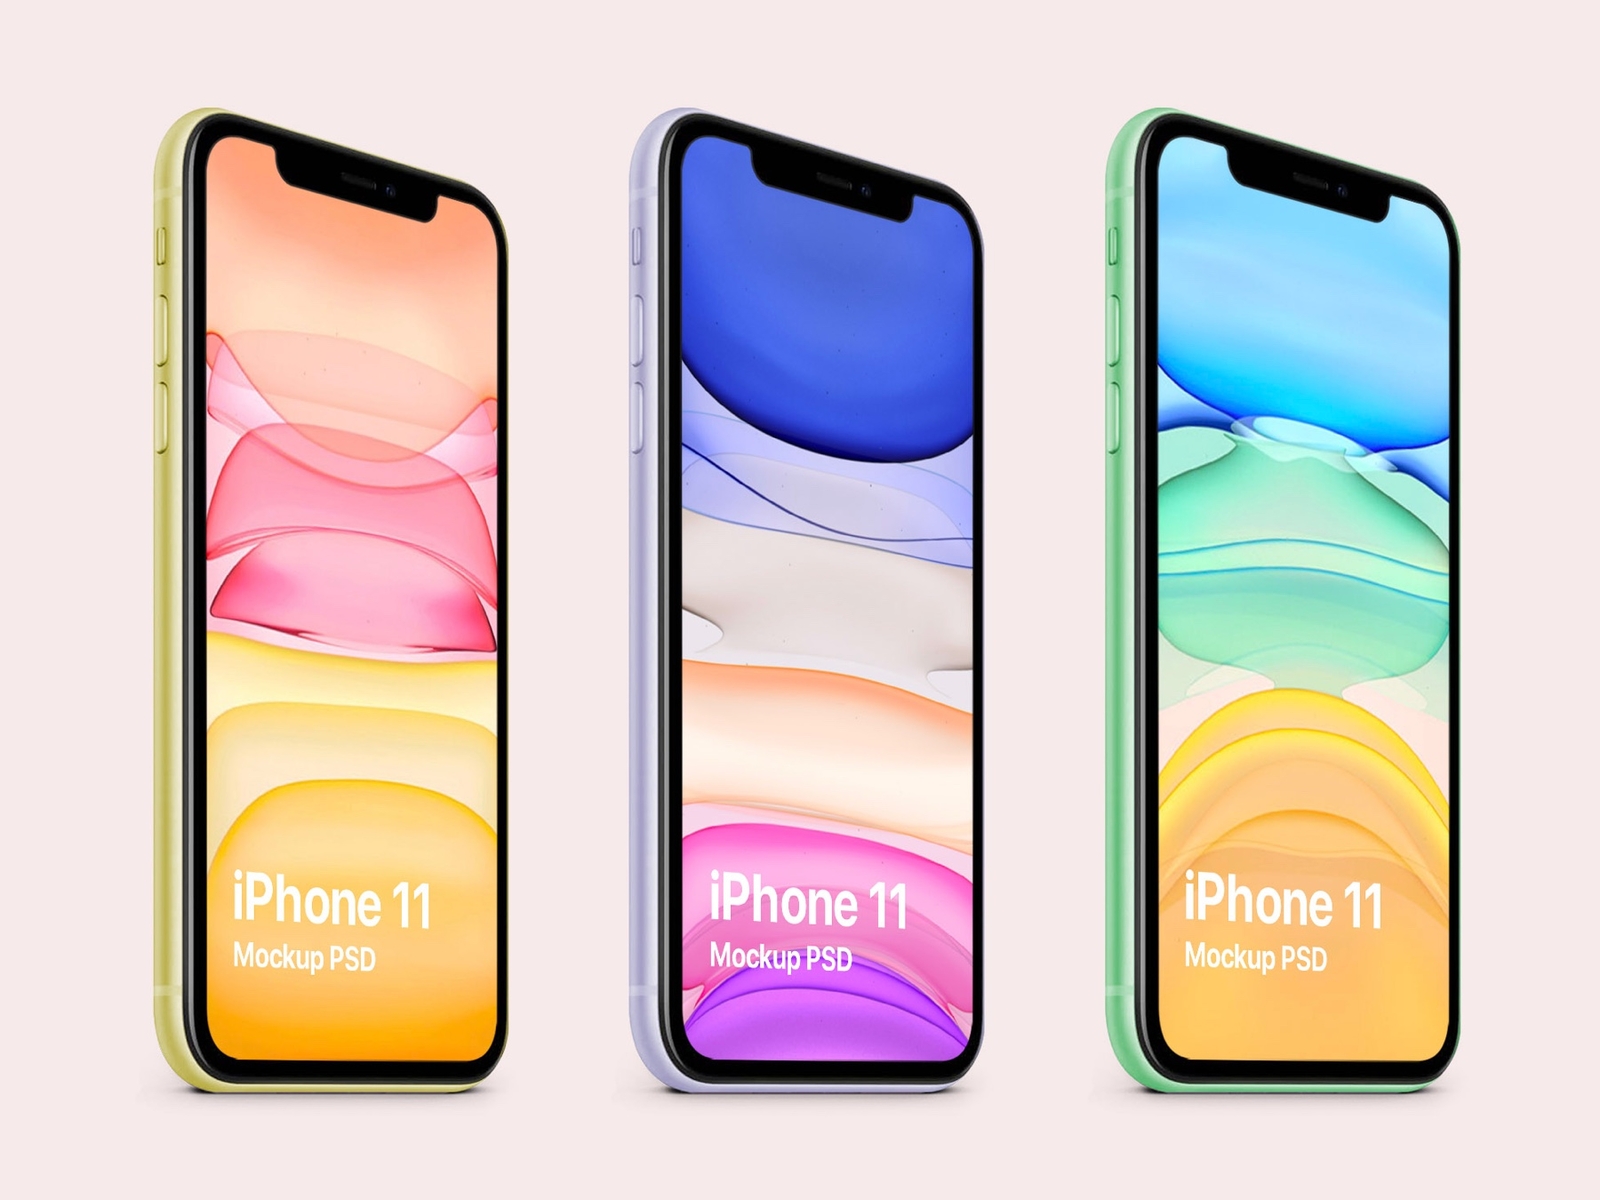 Download iPhone 11 mockup psd freebie by Interface Market on Dribbble